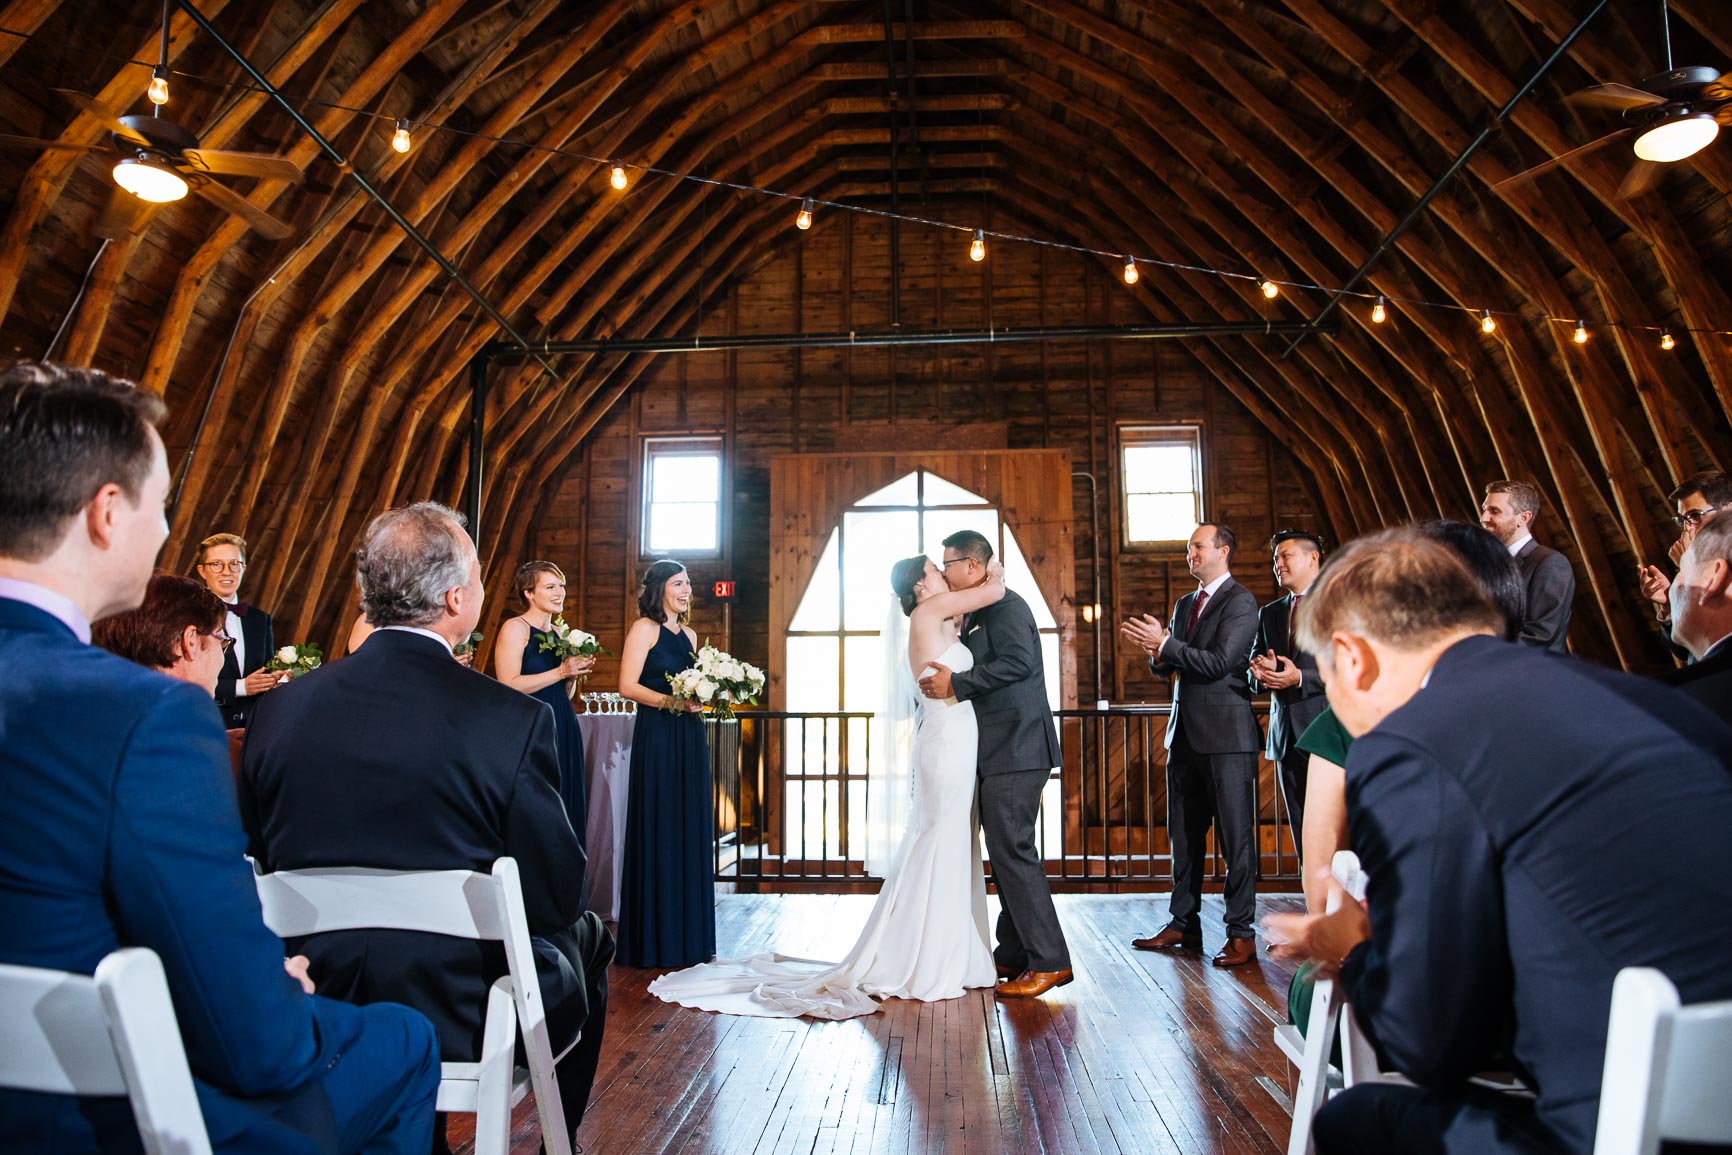 Wedding at The Dairy Barn in Fort Mill SC by Nhieu Tang photography | nhieutang.com